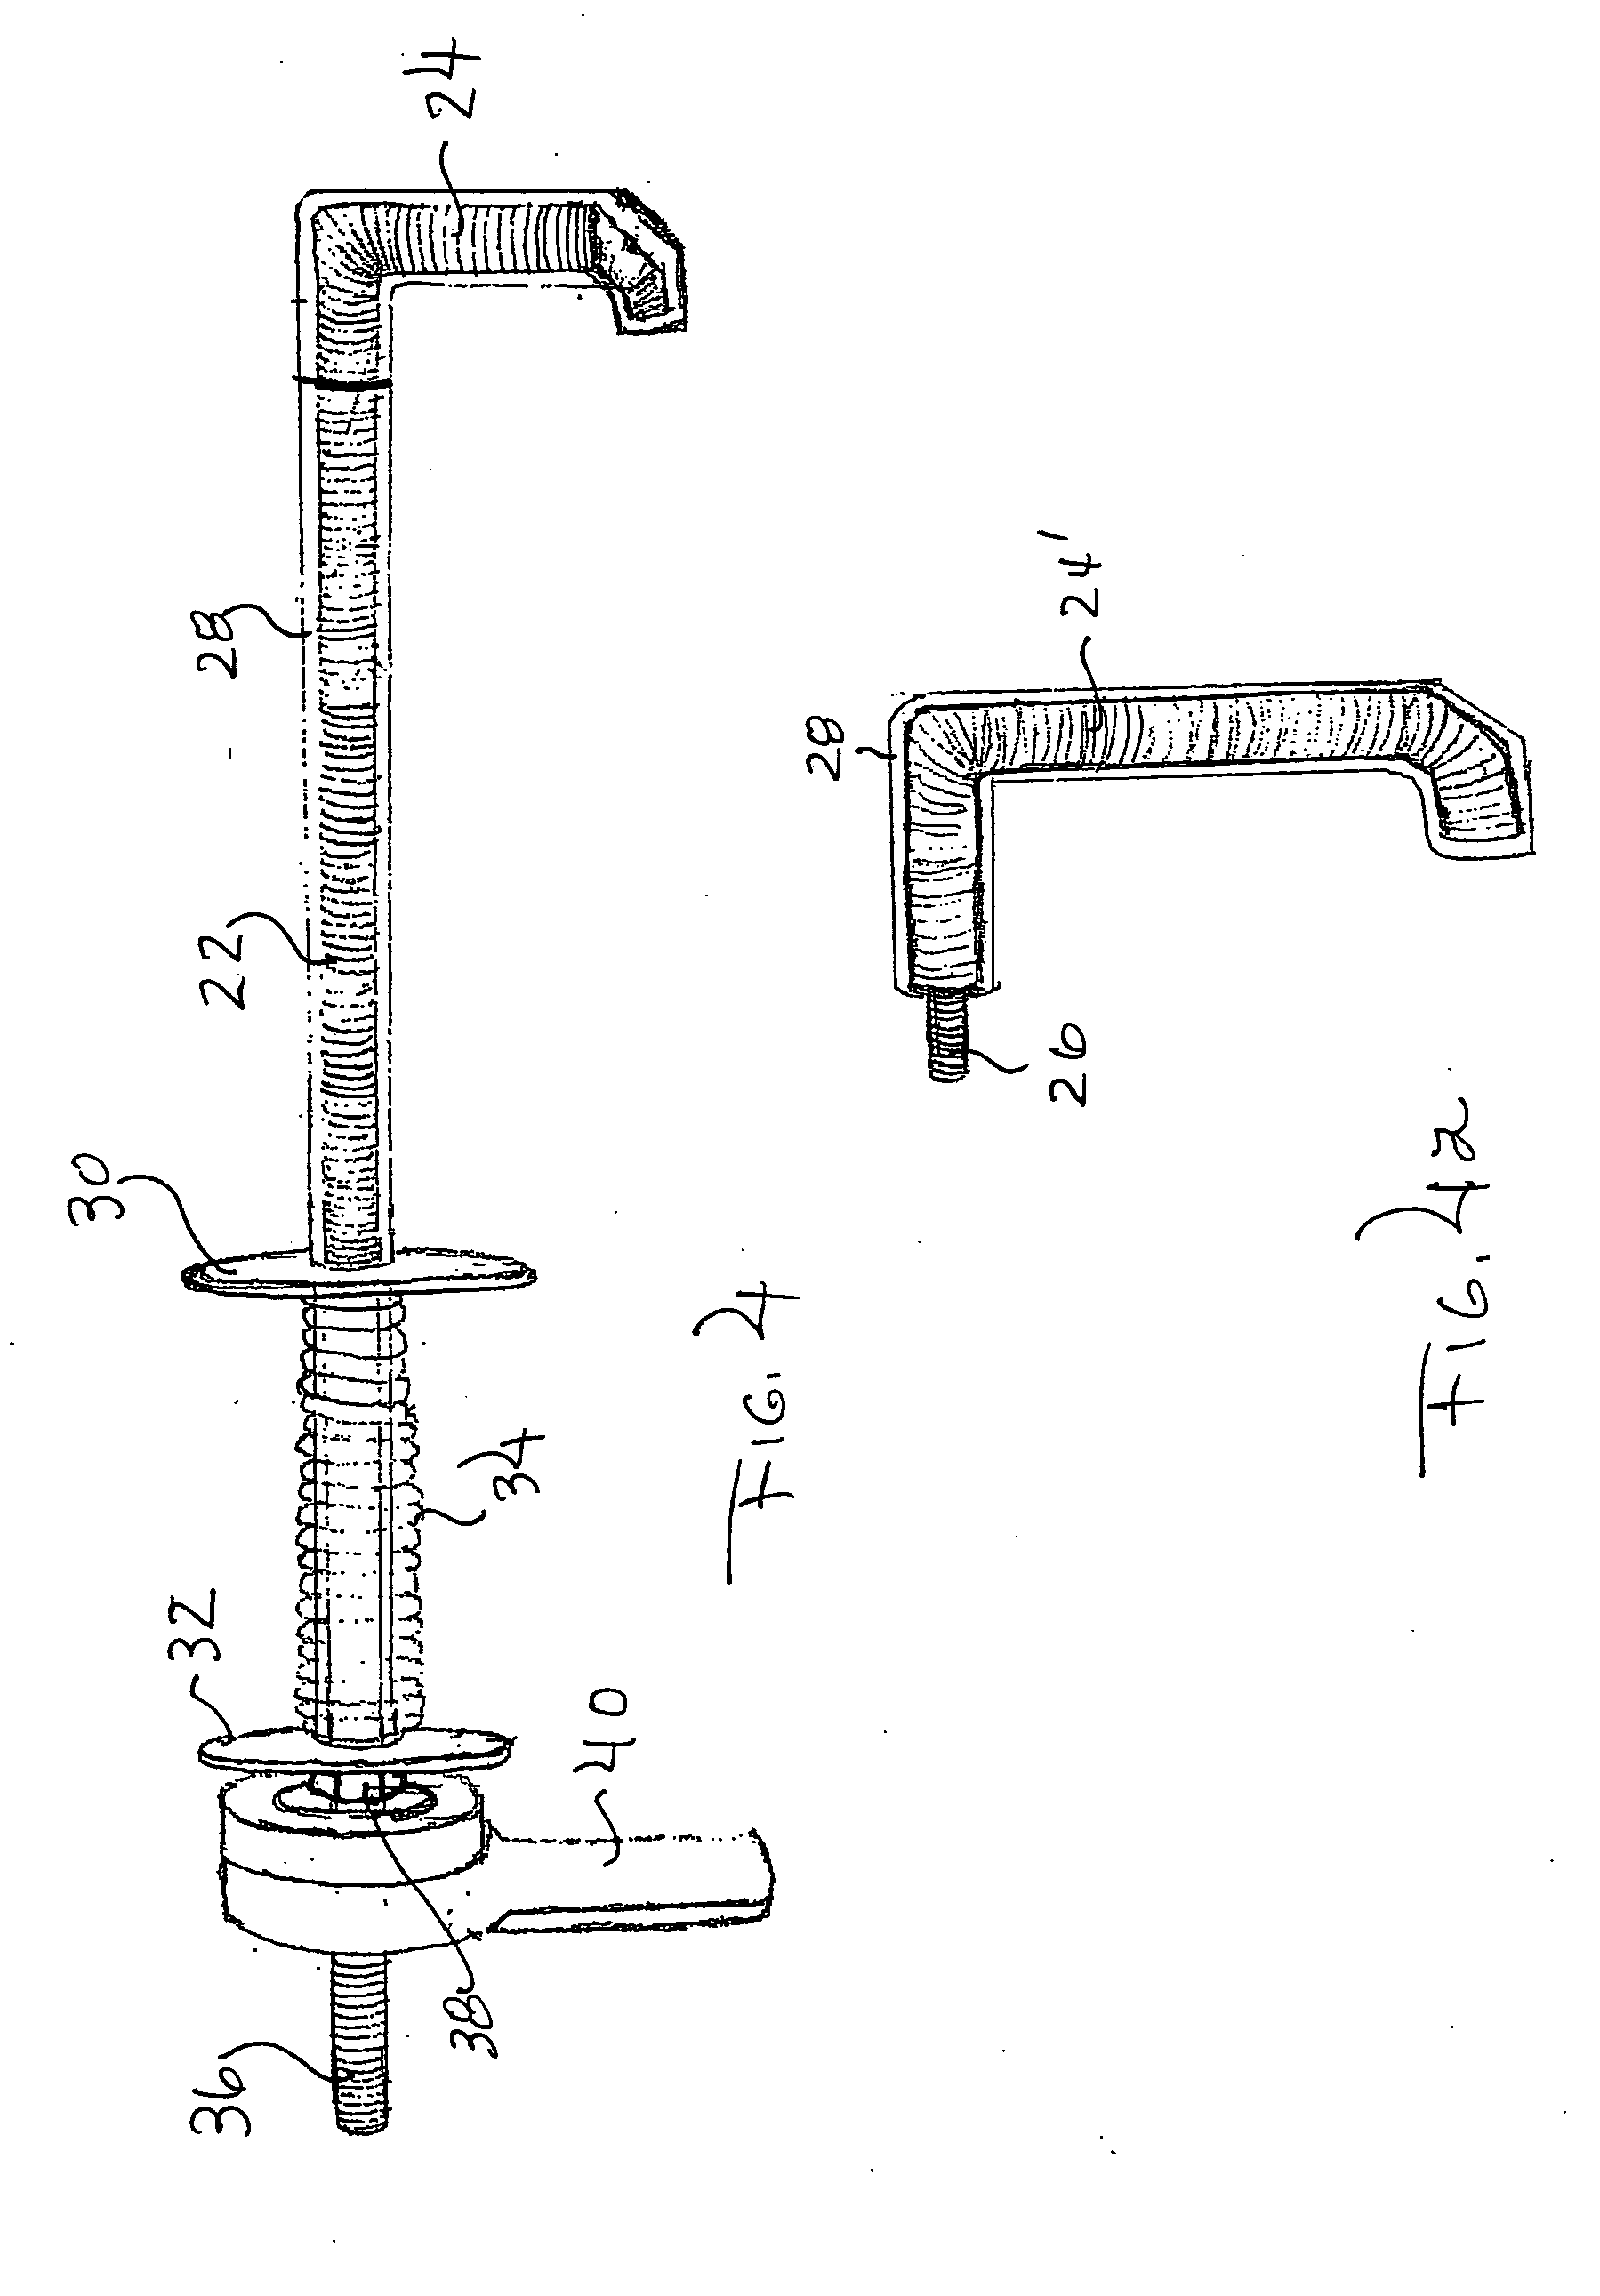 Shield assembly for dressing tires